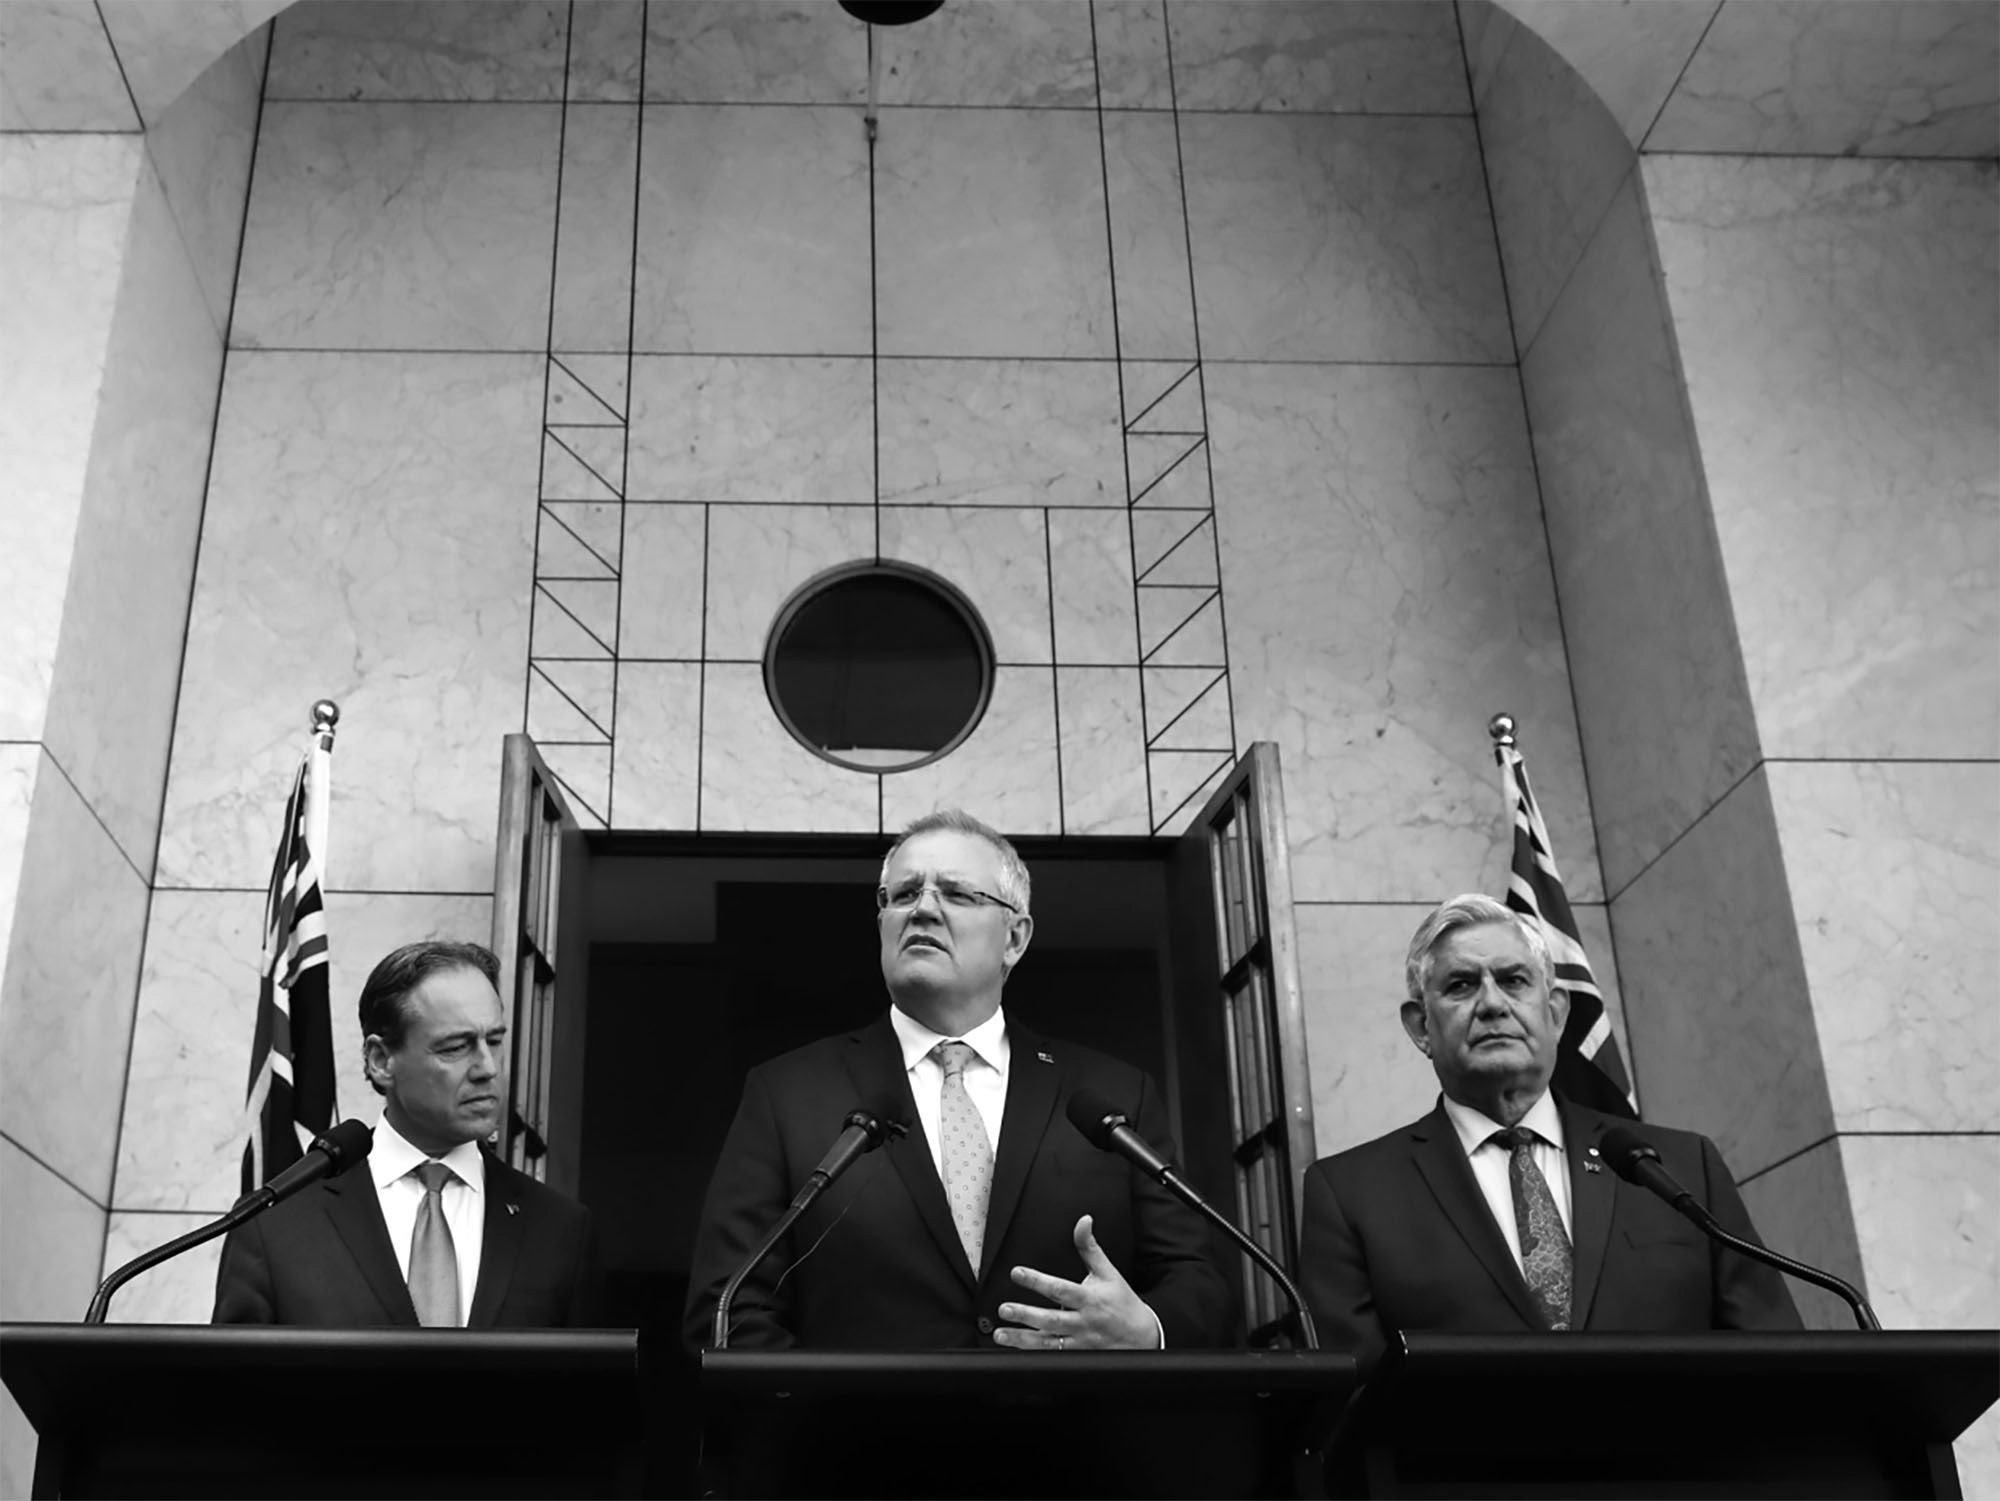 Minister for Health Greg Hunt, Prime Minister Scott Morrison and Minister for Senior Australians and Aged Care Ken Wyatt announcing the Royal Commission into Aged Care (Source: Twitter)
